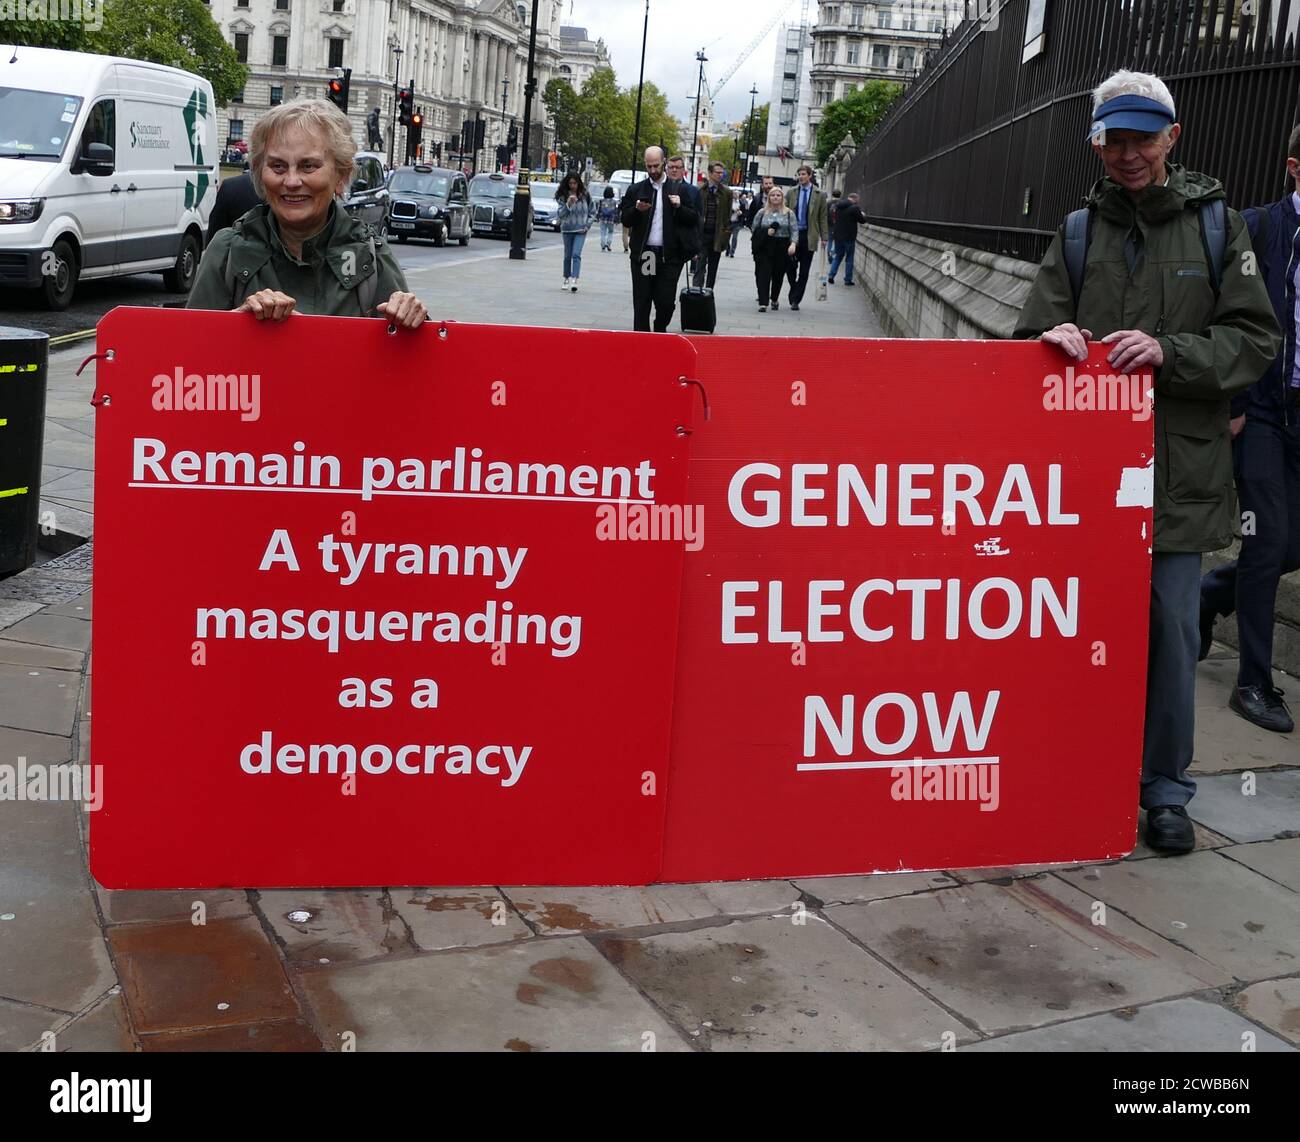 Pro-Brexit placard on display outside Parliament, London, September 2019. Brexit was the scheduled withdrawal of the United Kingdom (UK) from the European Union (EU). Following a June 2016 referendum, in which 51.9% of participating voters voted to leave, the UK government formally announced the country's withdrawal in March 2017, starting a two-year process that was due to conclude with the UK withdrawing on 29 March 2019. As the UK parliament thrice voted against the negotiated withdrawal agreement, that deadline has been extended twice, and is currently 31 October 2019. Stock Photo